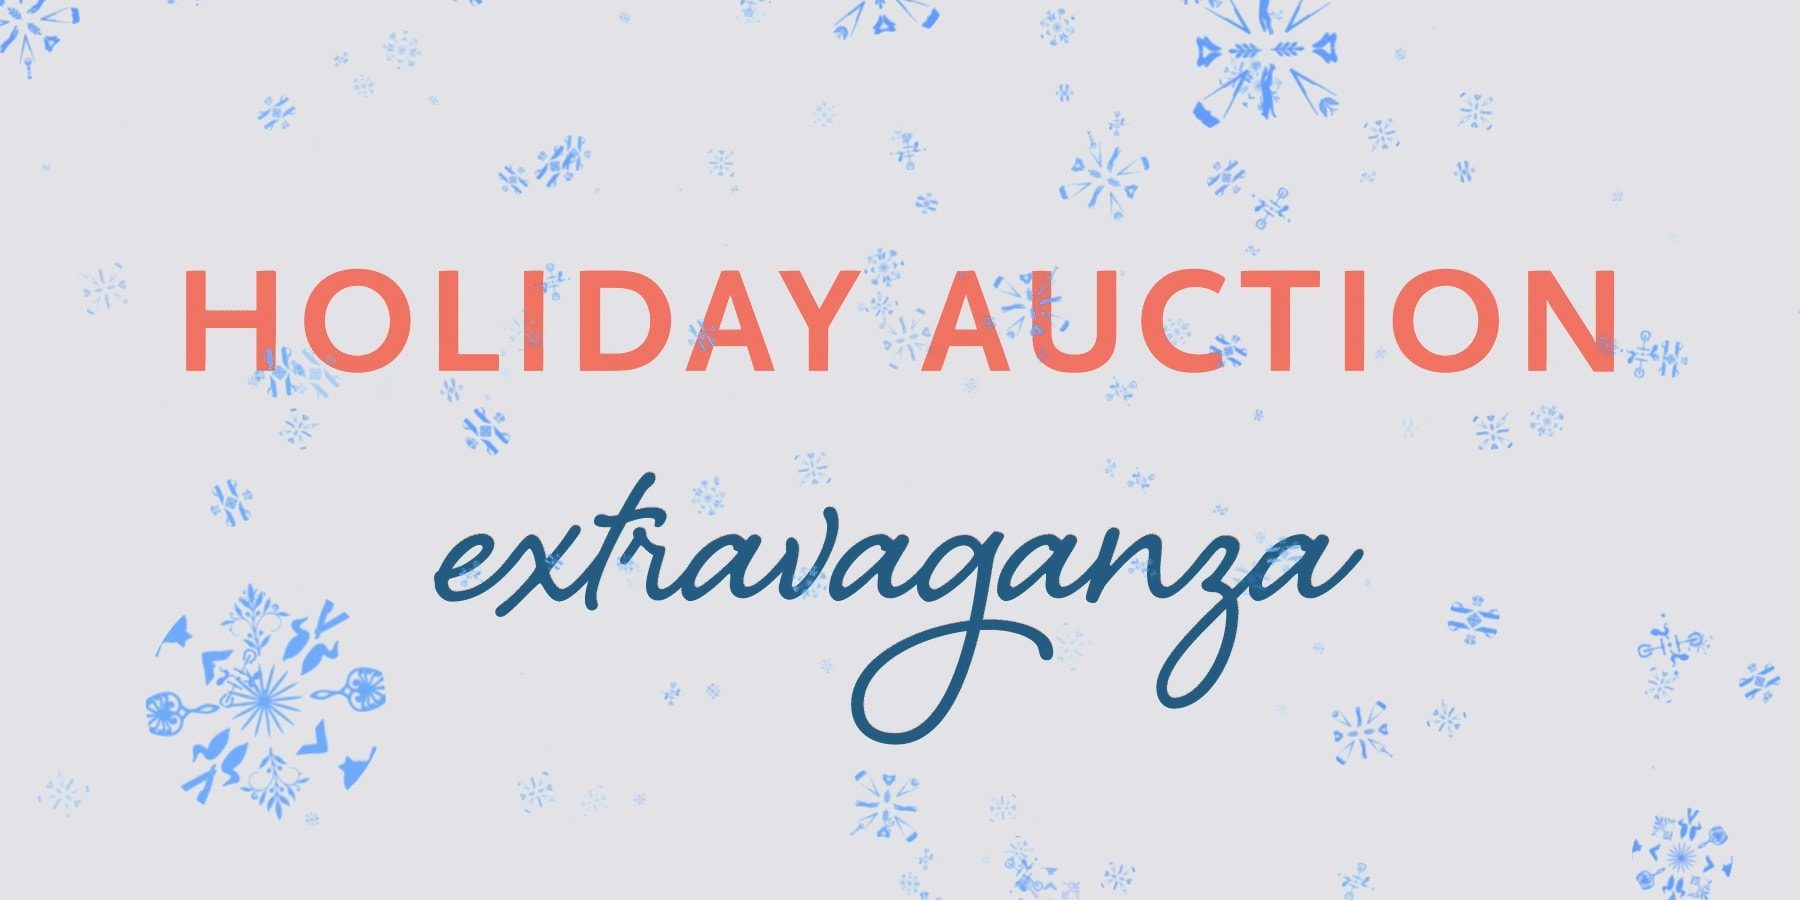 Holiday Auction Extravaganza